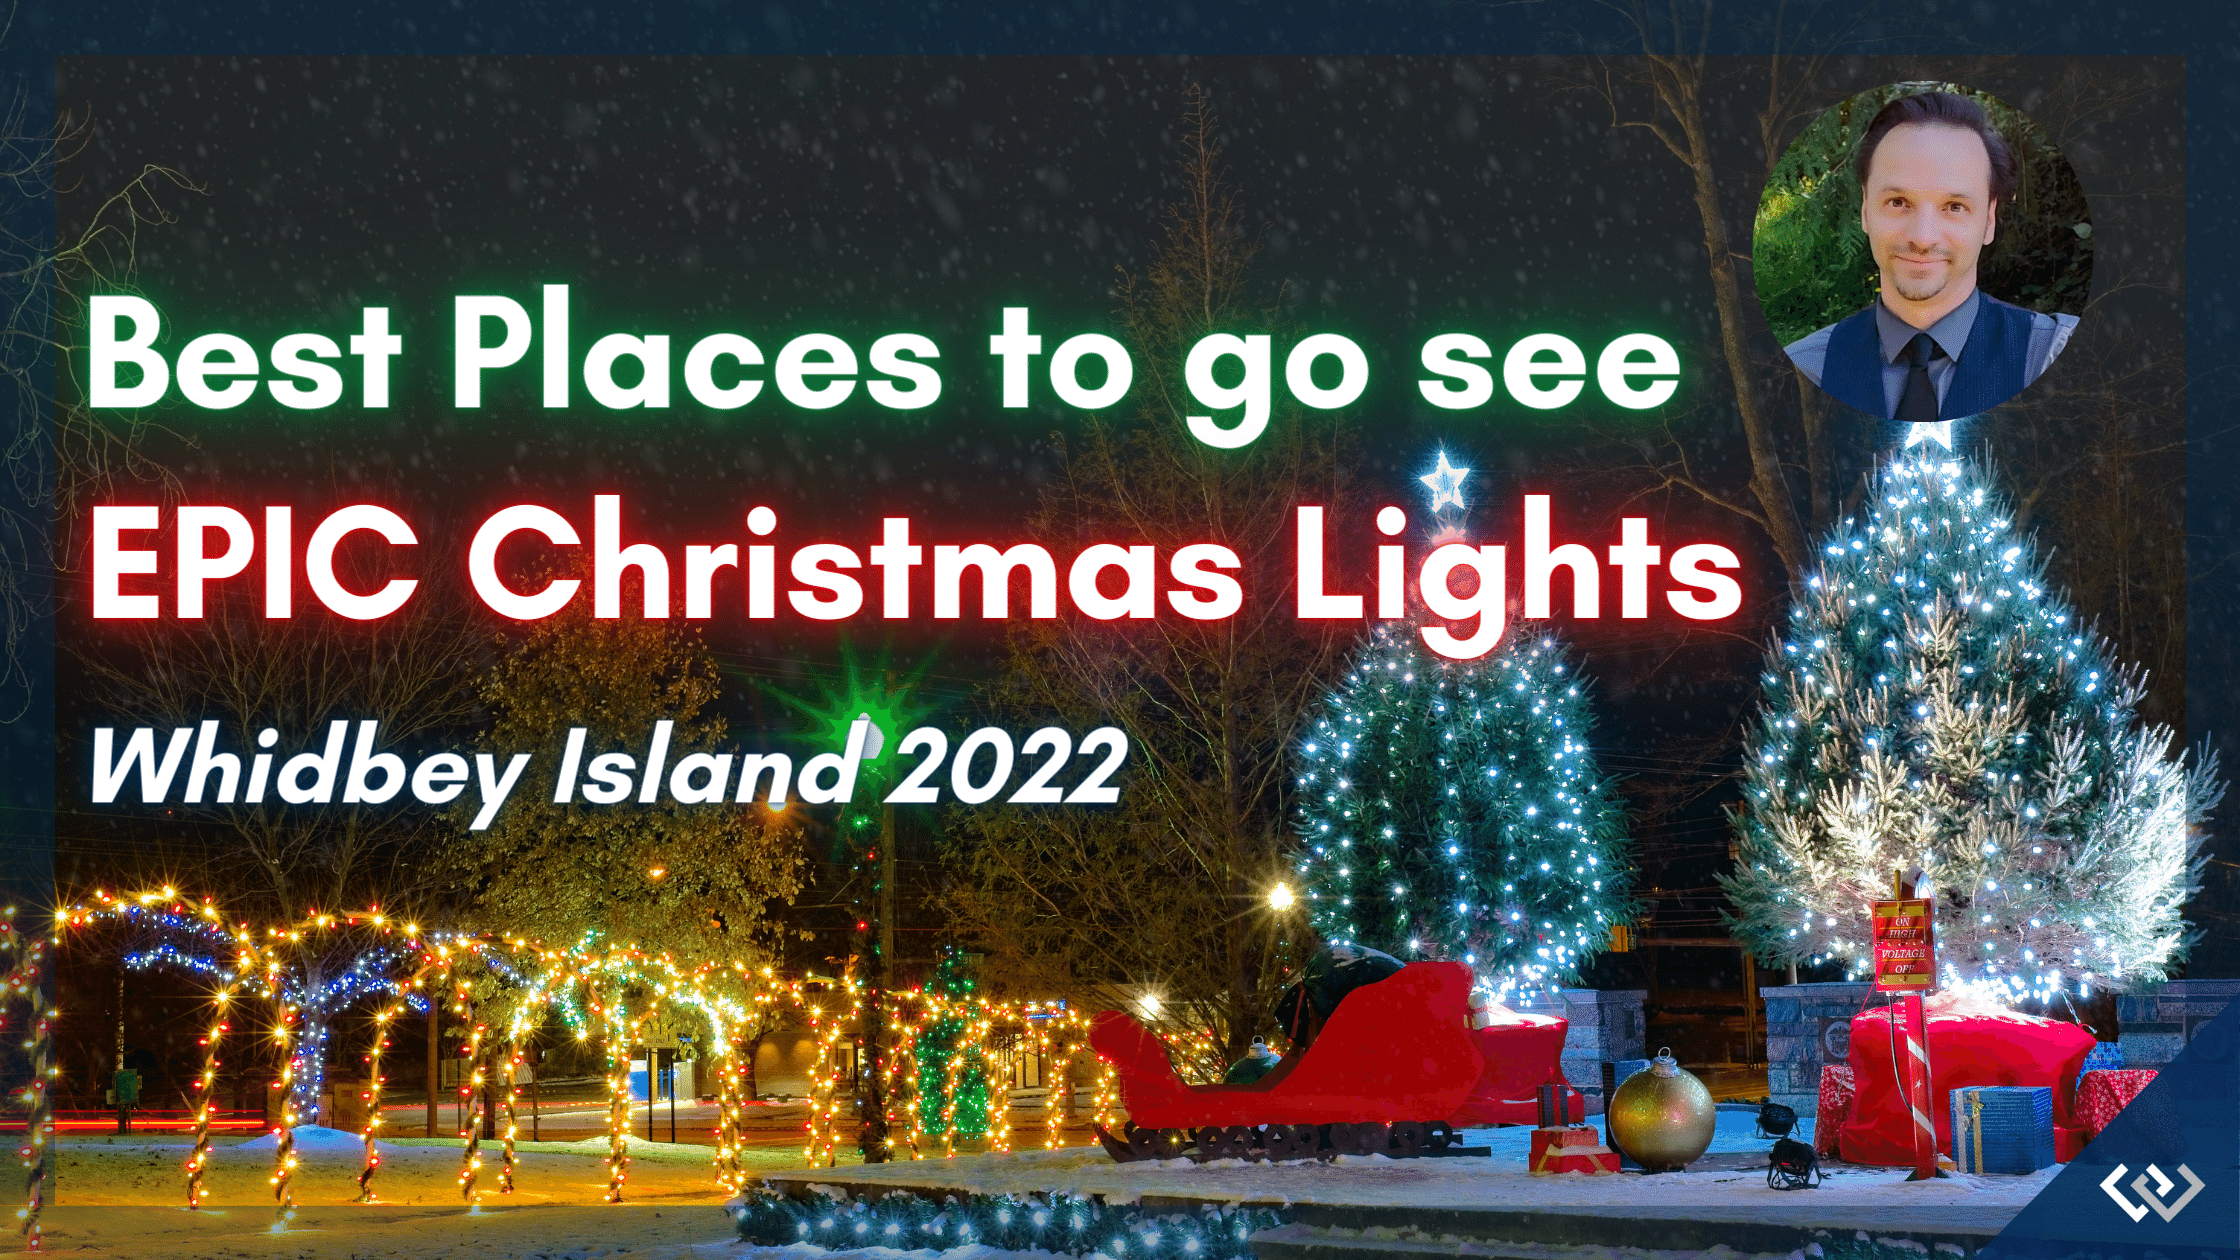 Best Places to go see EPIC Christmas Lights - Whidbey Island 2022 Guide